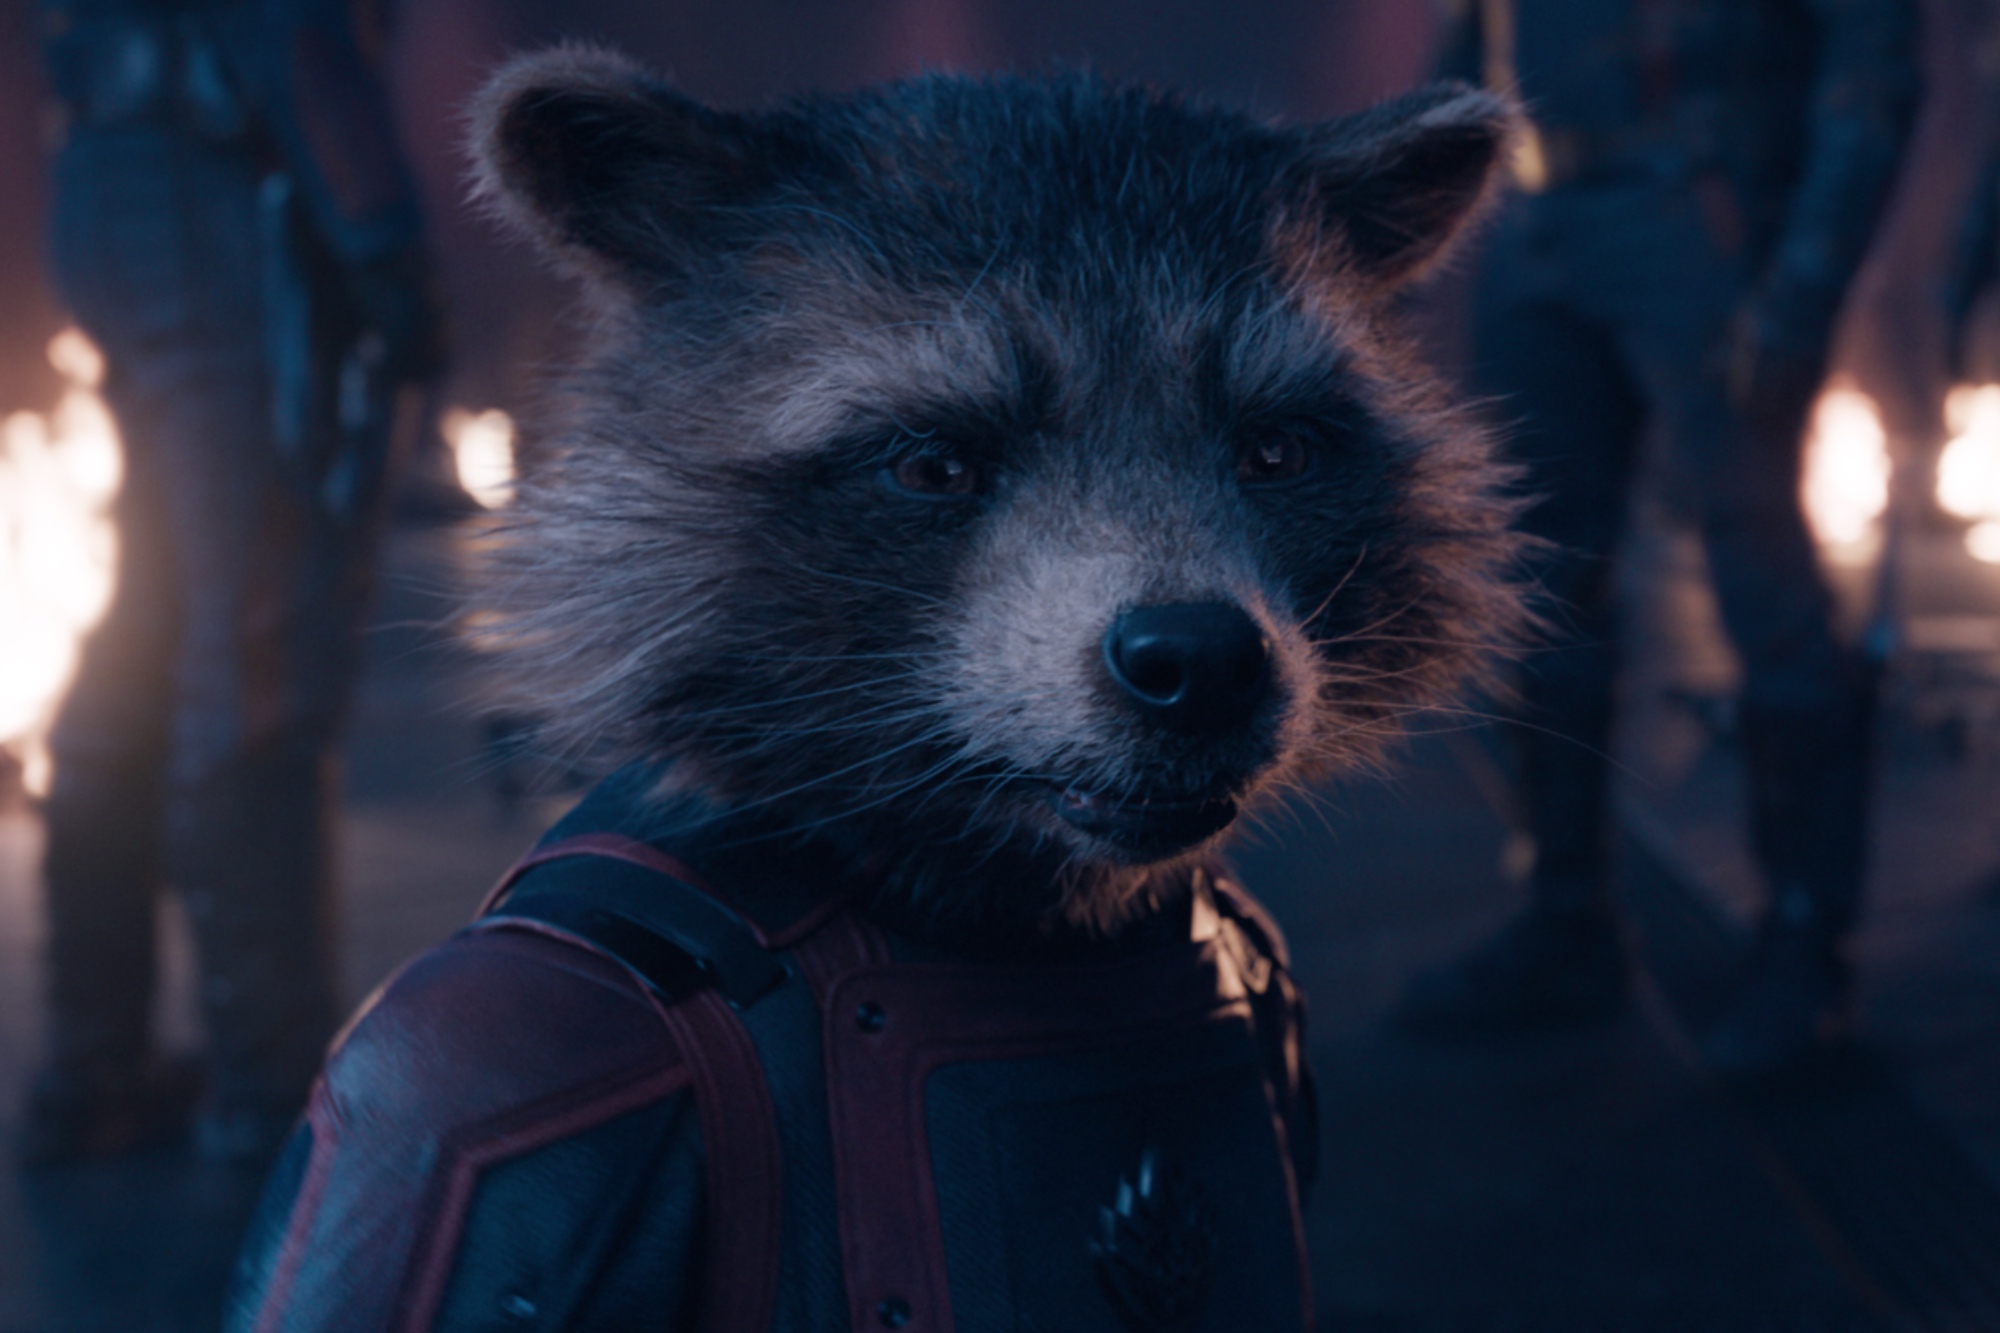 Marvel Avengers: Endgame Thor & Rocket Raccoon 2 Pack Characters from  Cinematic Universe Mcu Movies